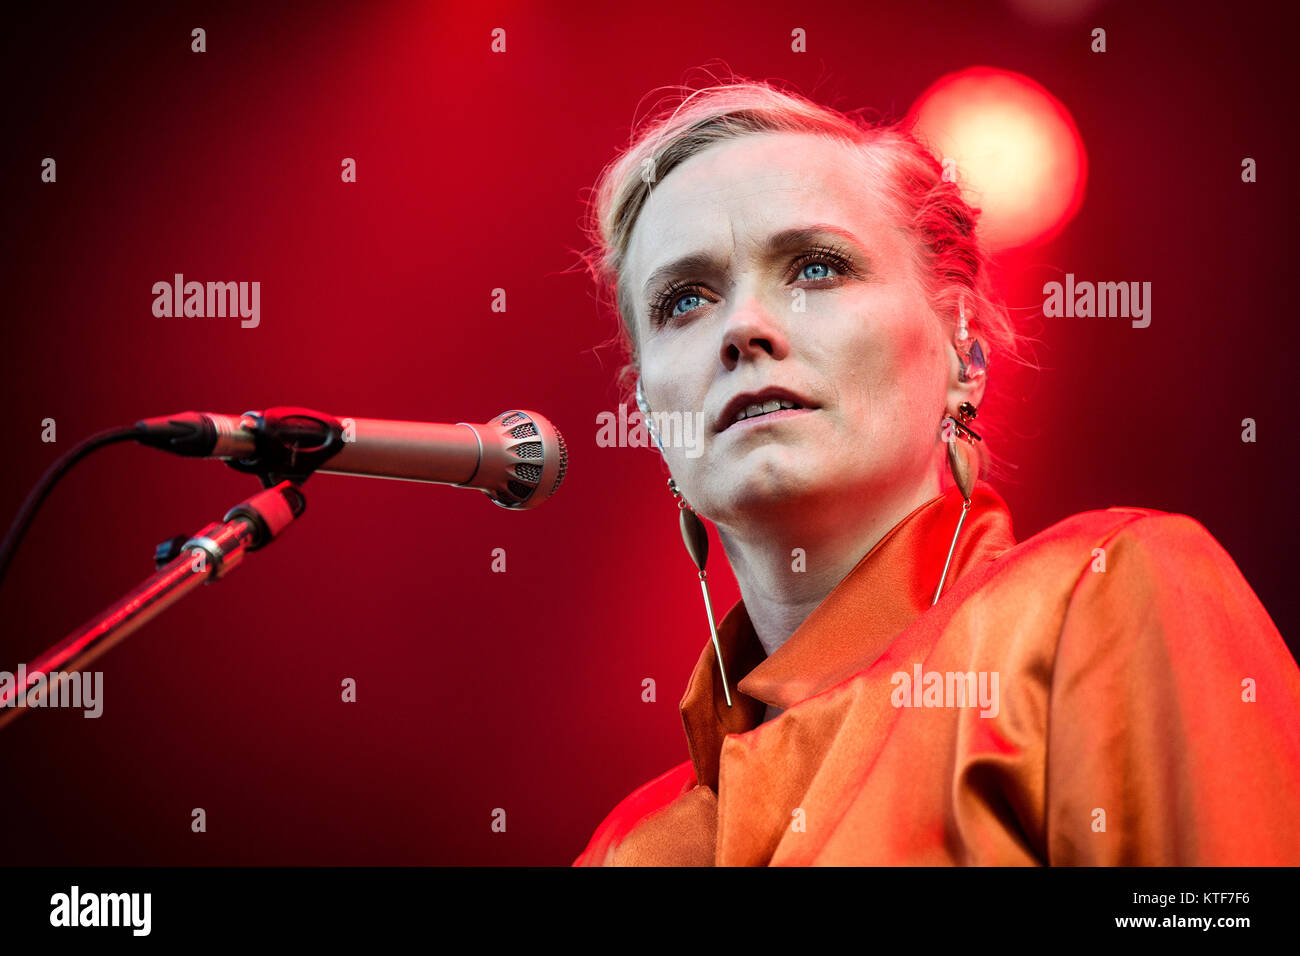 The Norwegian singer, songwriter and musician Ane Brun performs a live concert at the Norwegian music festival Øyafestivalen 2016 in Oslo. Norway, 10/08 2016. Stock Photo